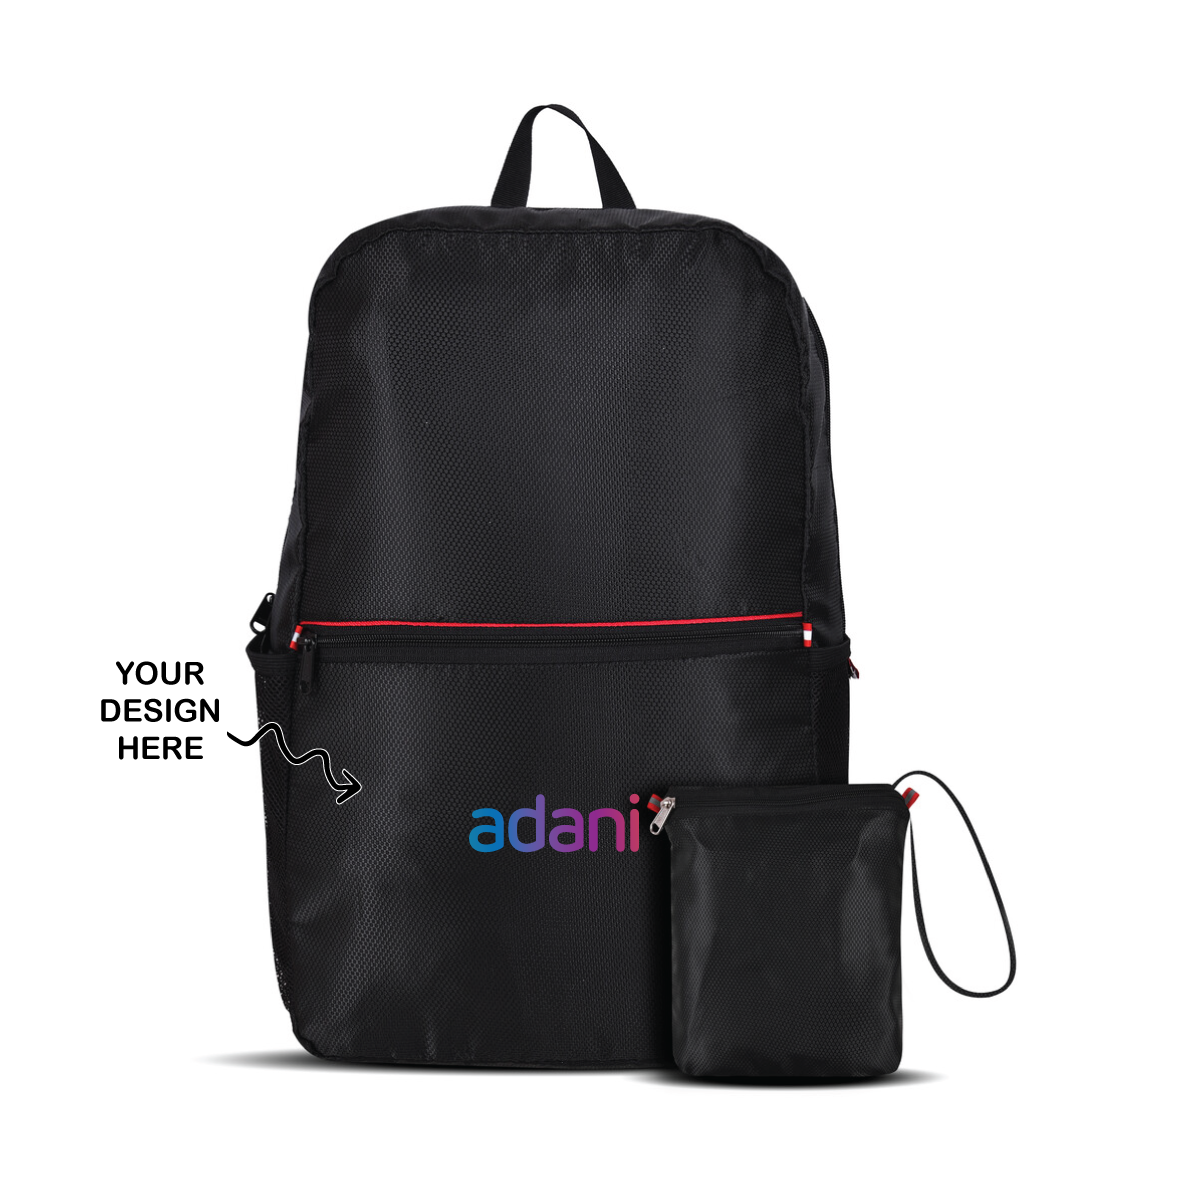 Personalized Folding Backpack - For Employee Gifting, Corporate Gifting, Customer and Stakeholder Gifting, Colleges, Classes, Schools Use, Return Gift, Exhibition Gift - LO-TB23